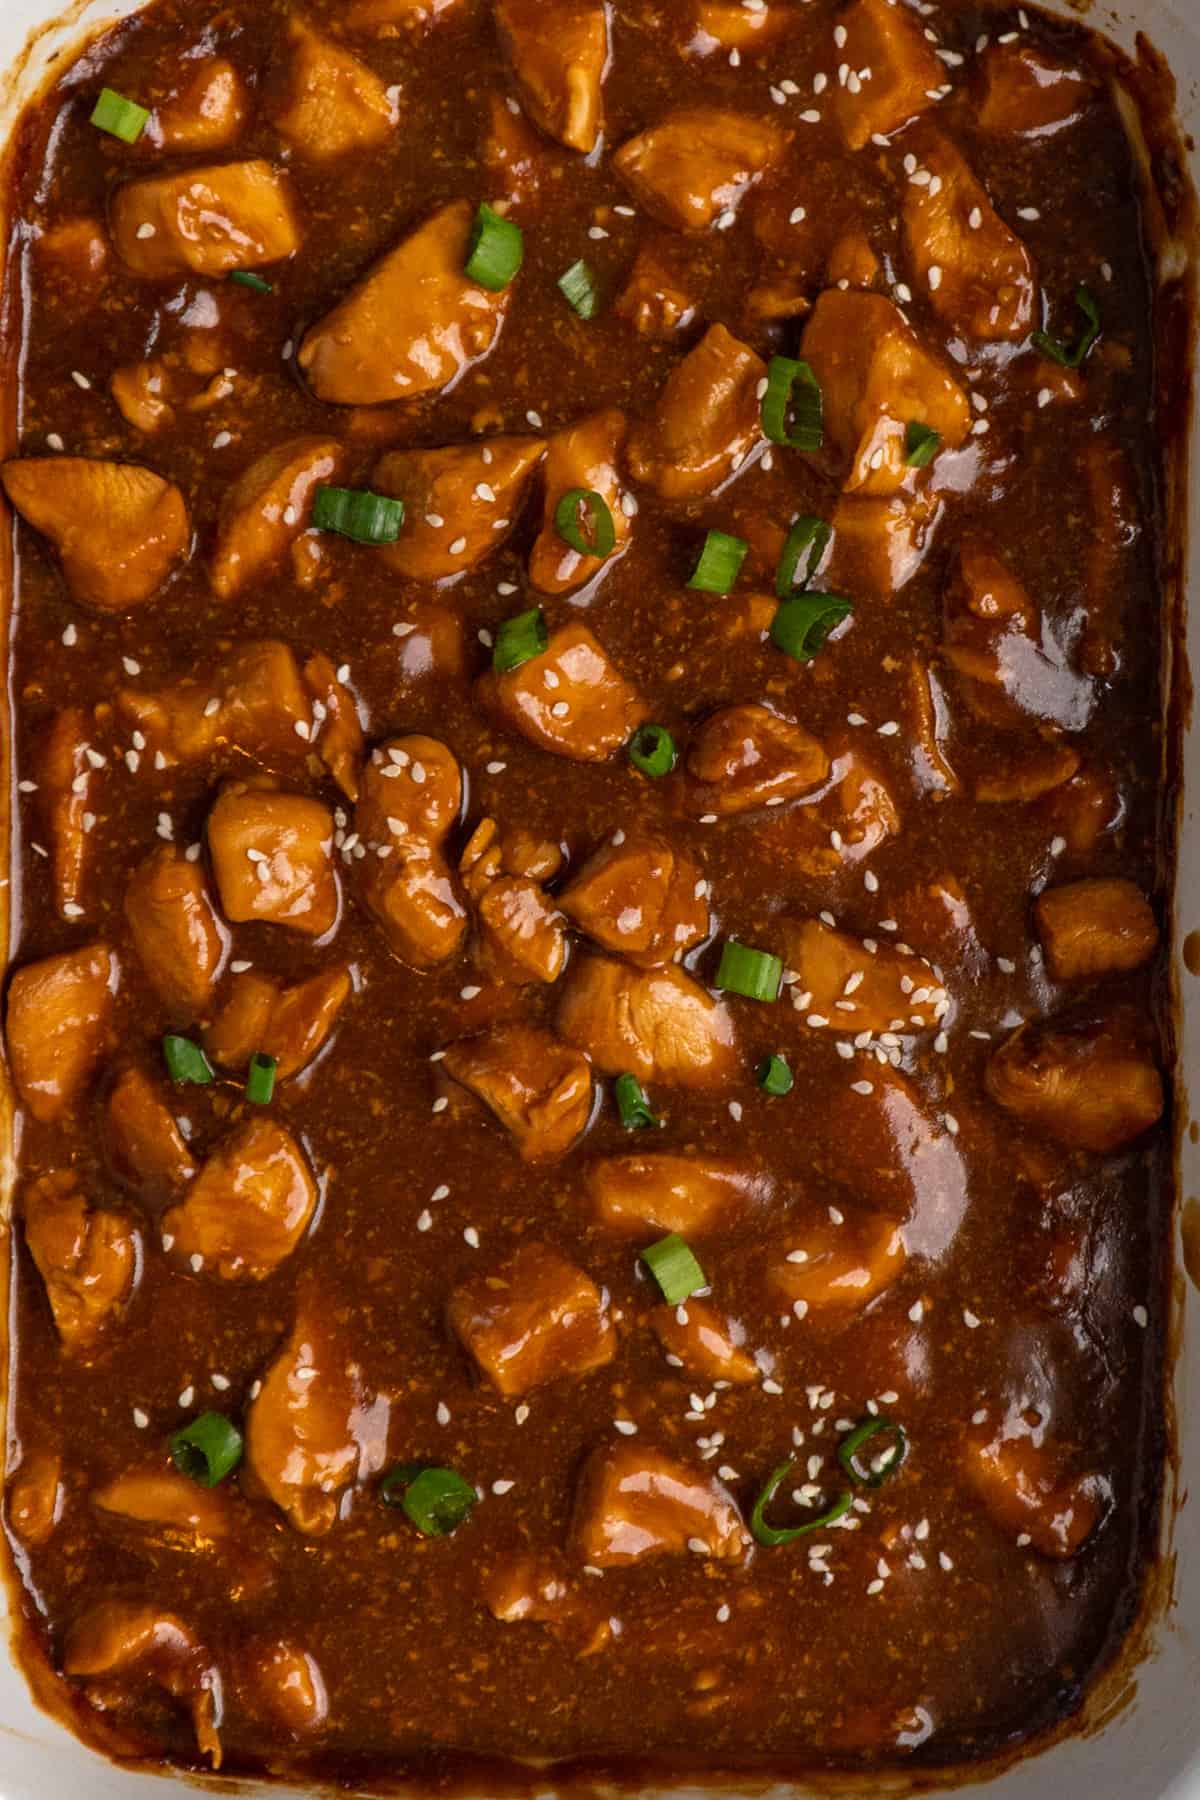 Teriyaki chicken in a slow cooker garnished with green onions.